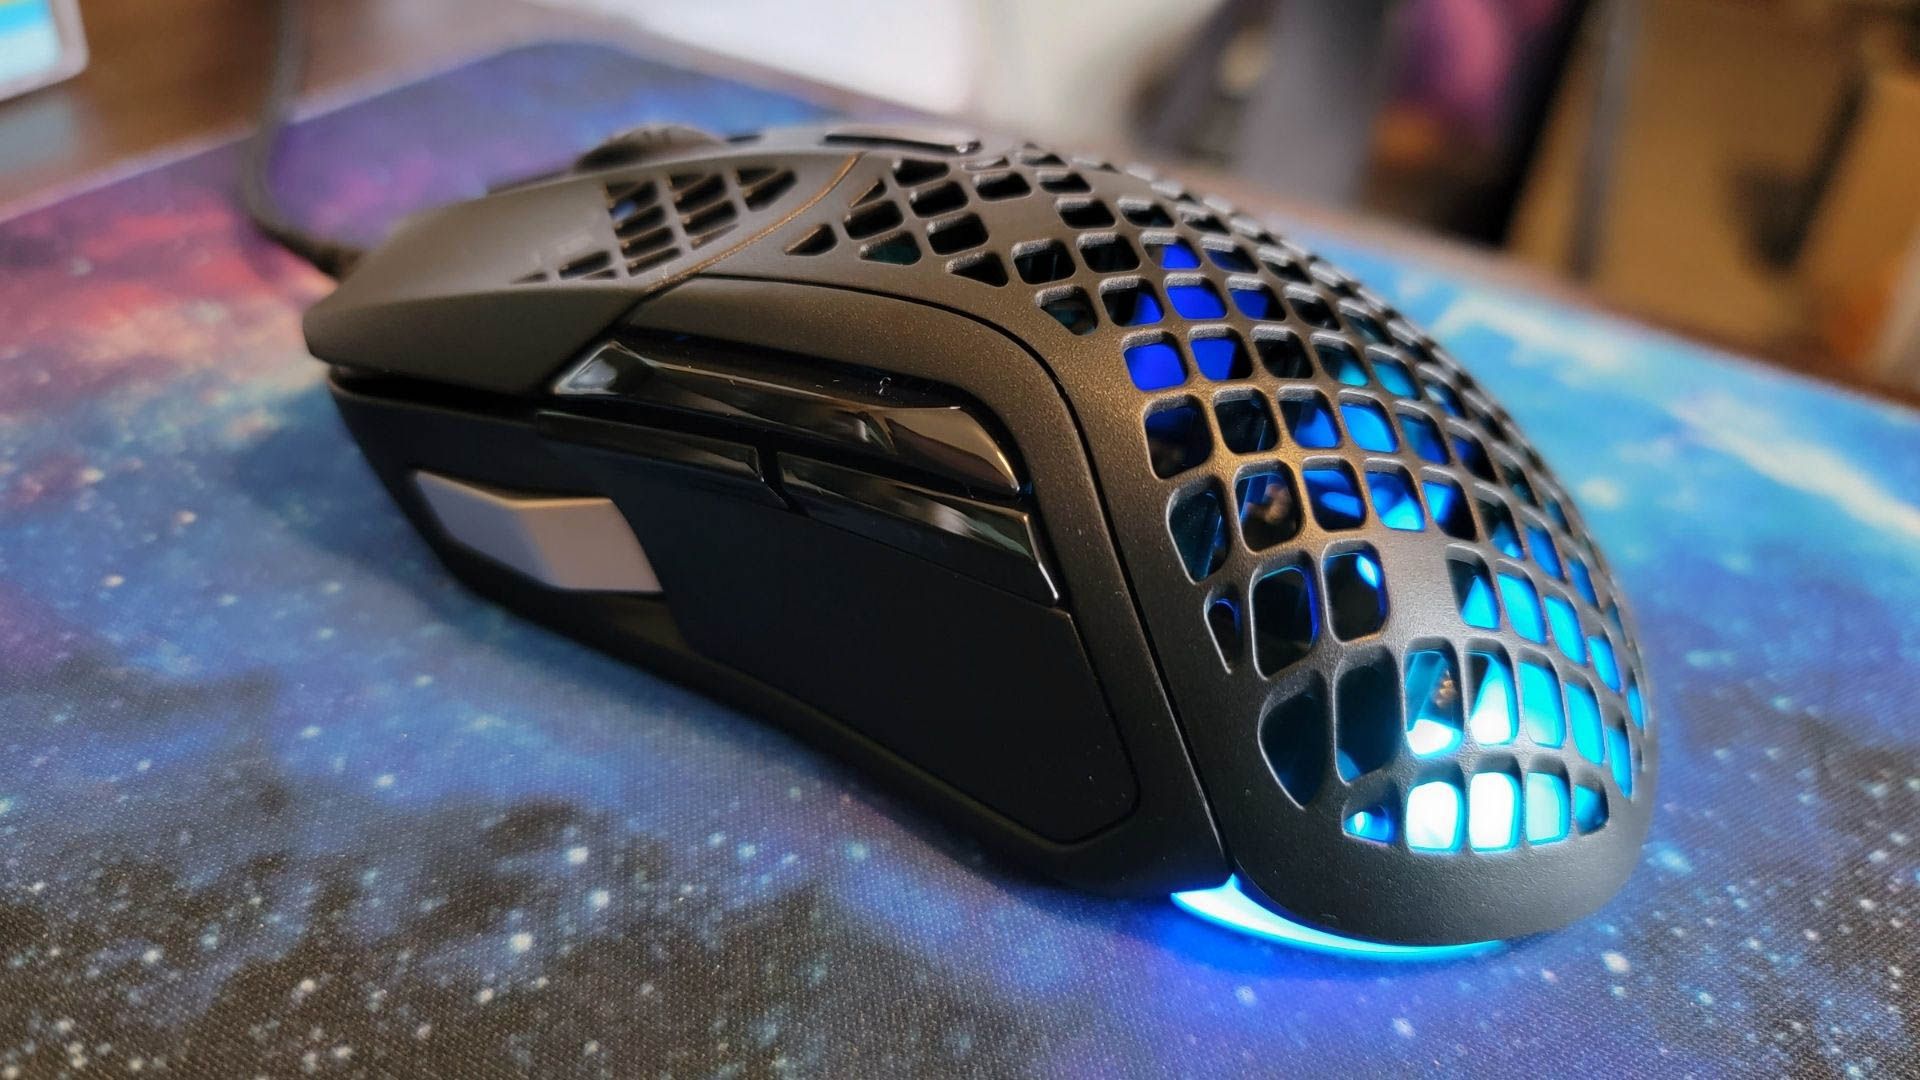 side shot of the steelseries aerox 5 gaming mouse with blue led light